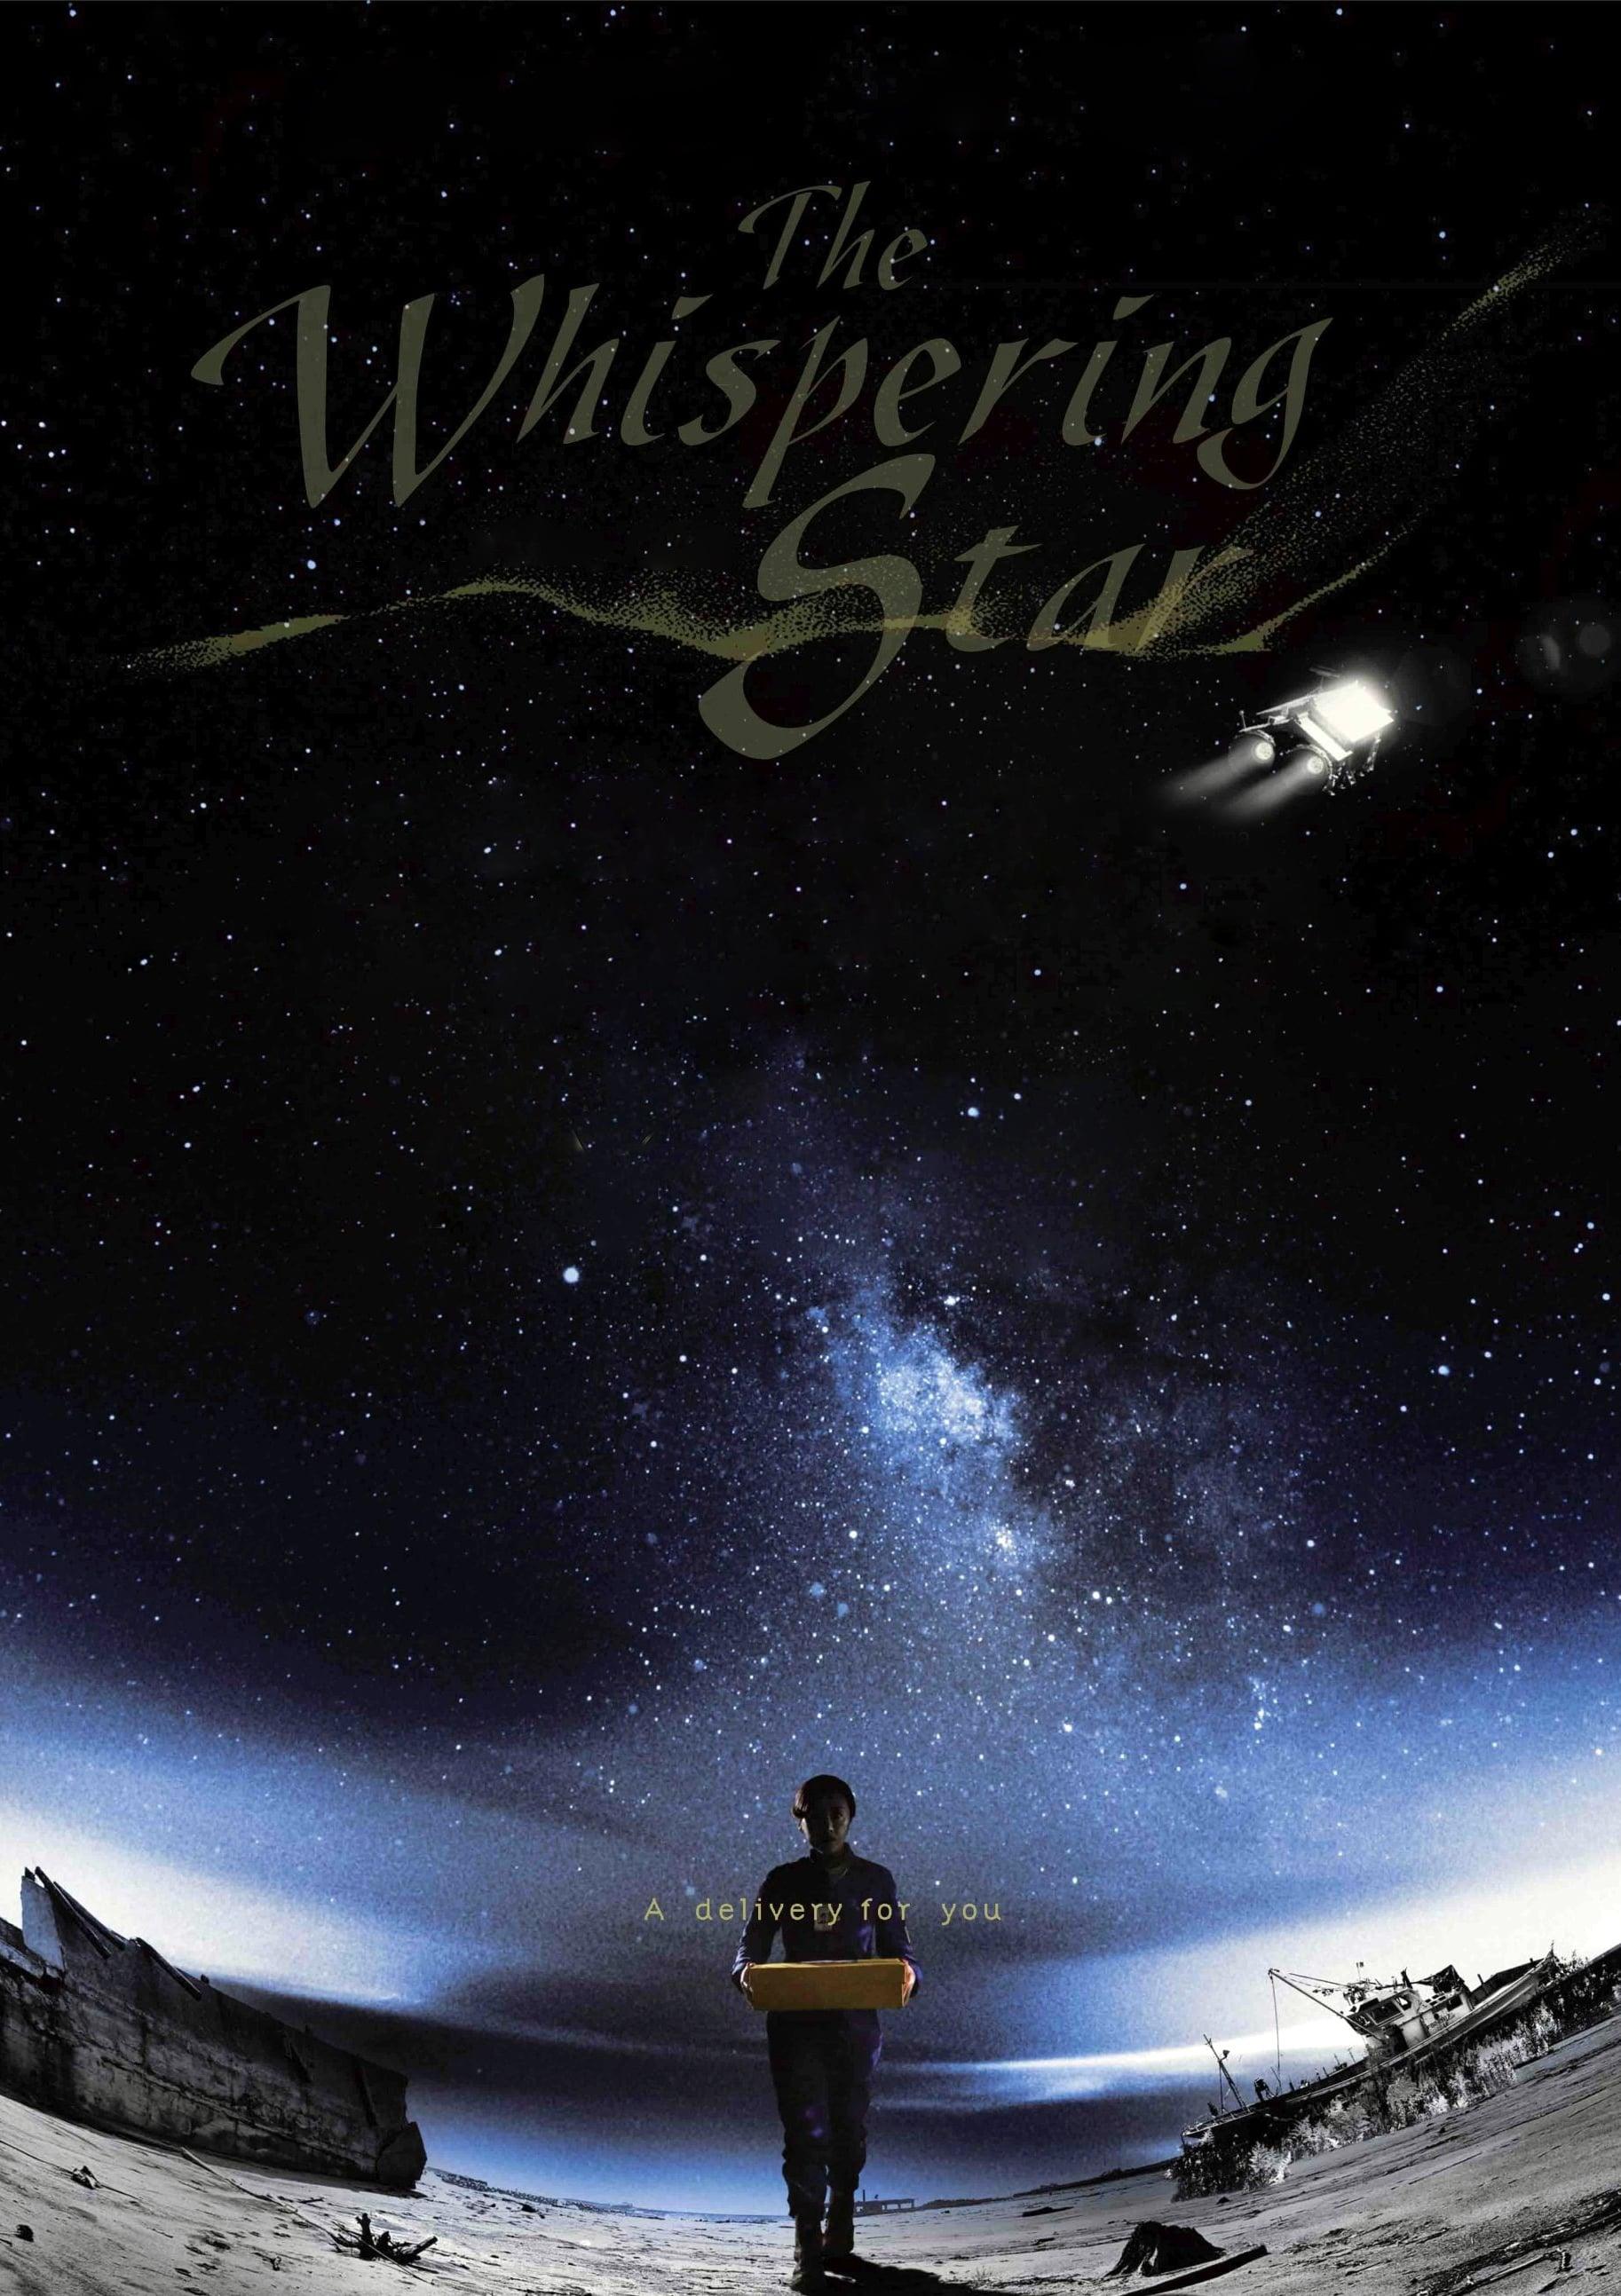 The Whispering Star poster